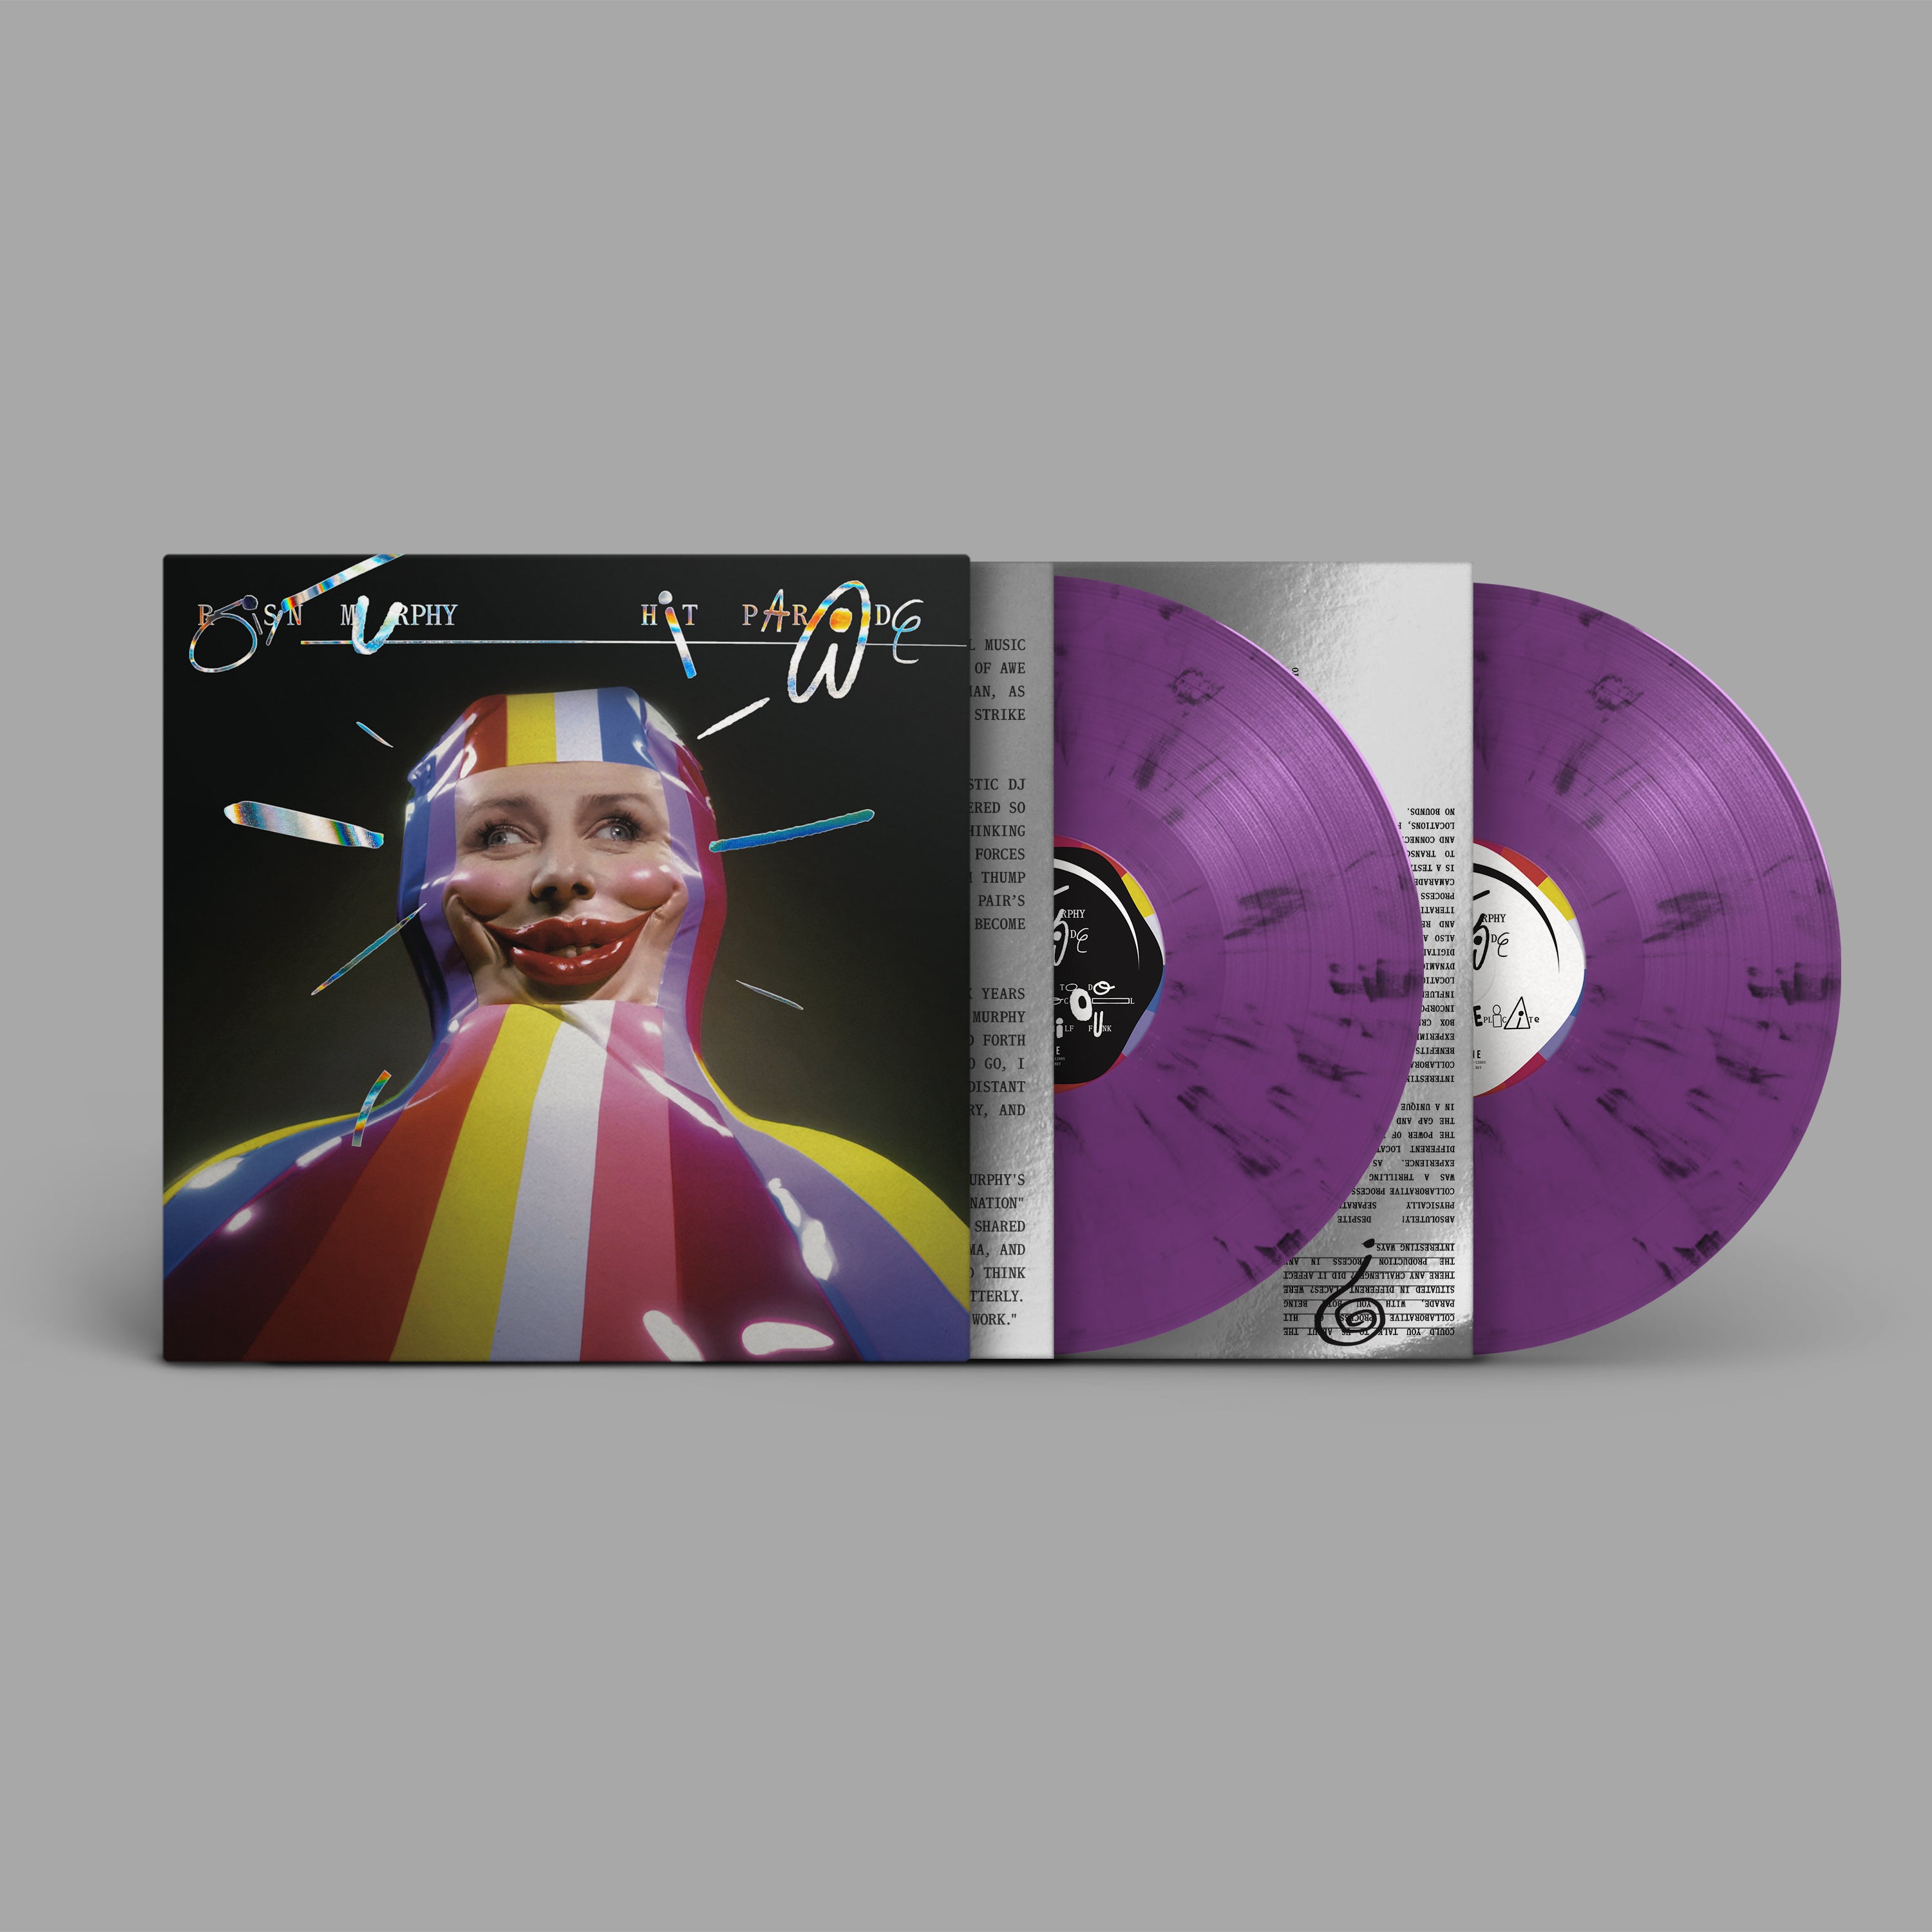 Hit Parade: Limited Deluxe Marbled Purple Vinyl 2LP